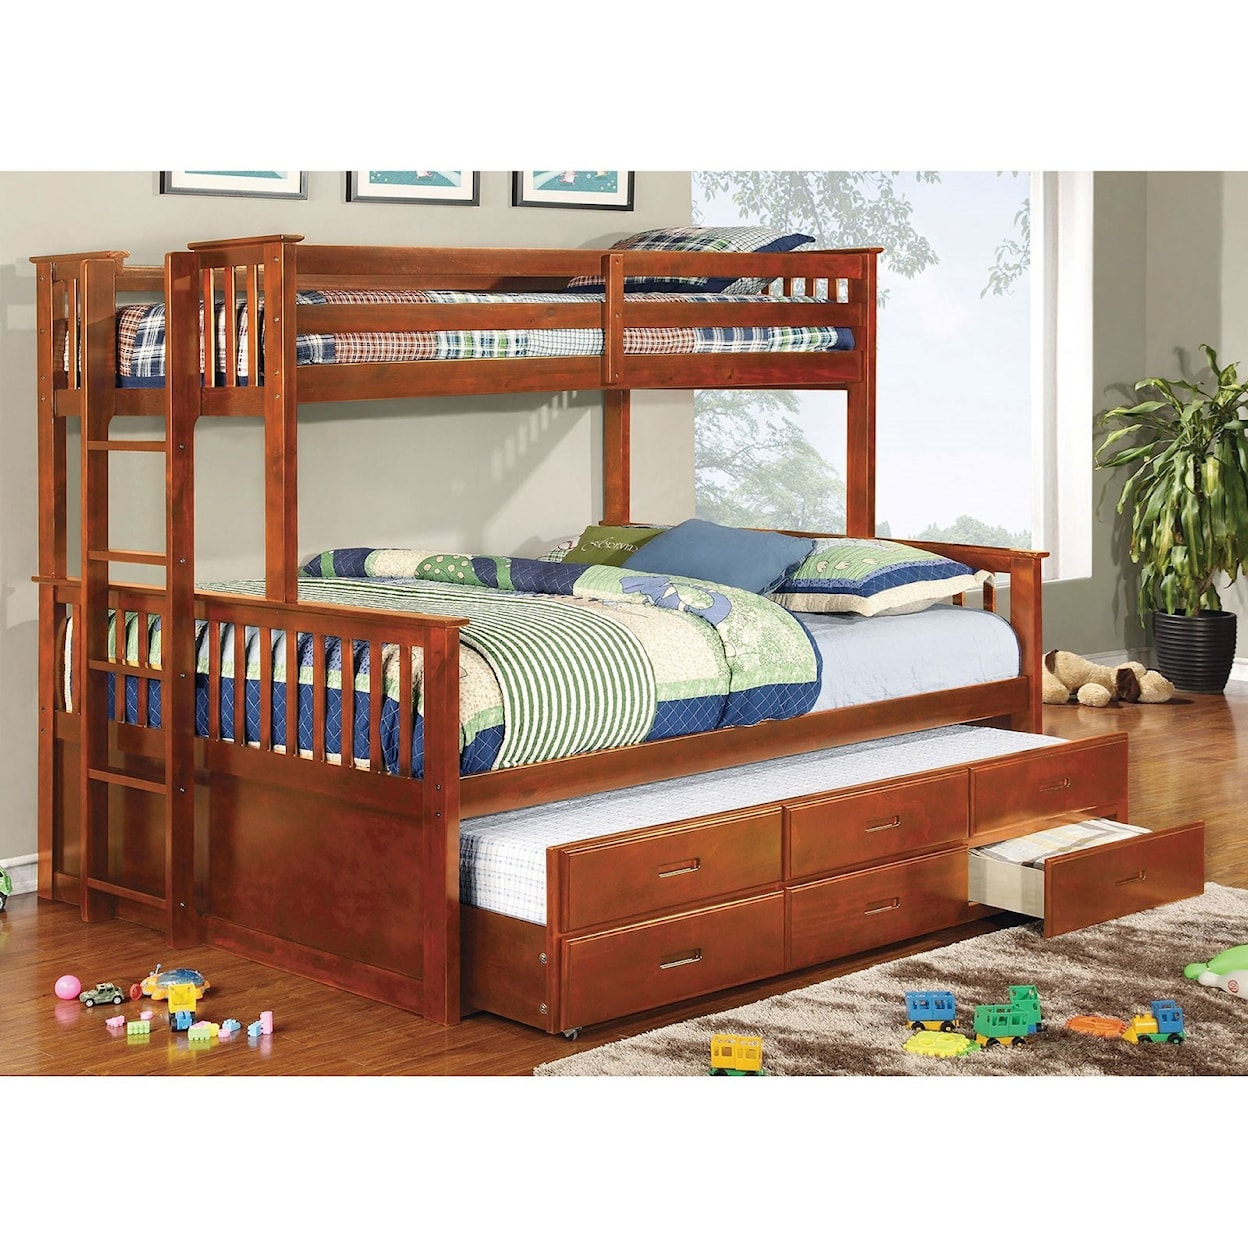 Furniture of America University Twin-over-Queen Bunk Bed and Trundle